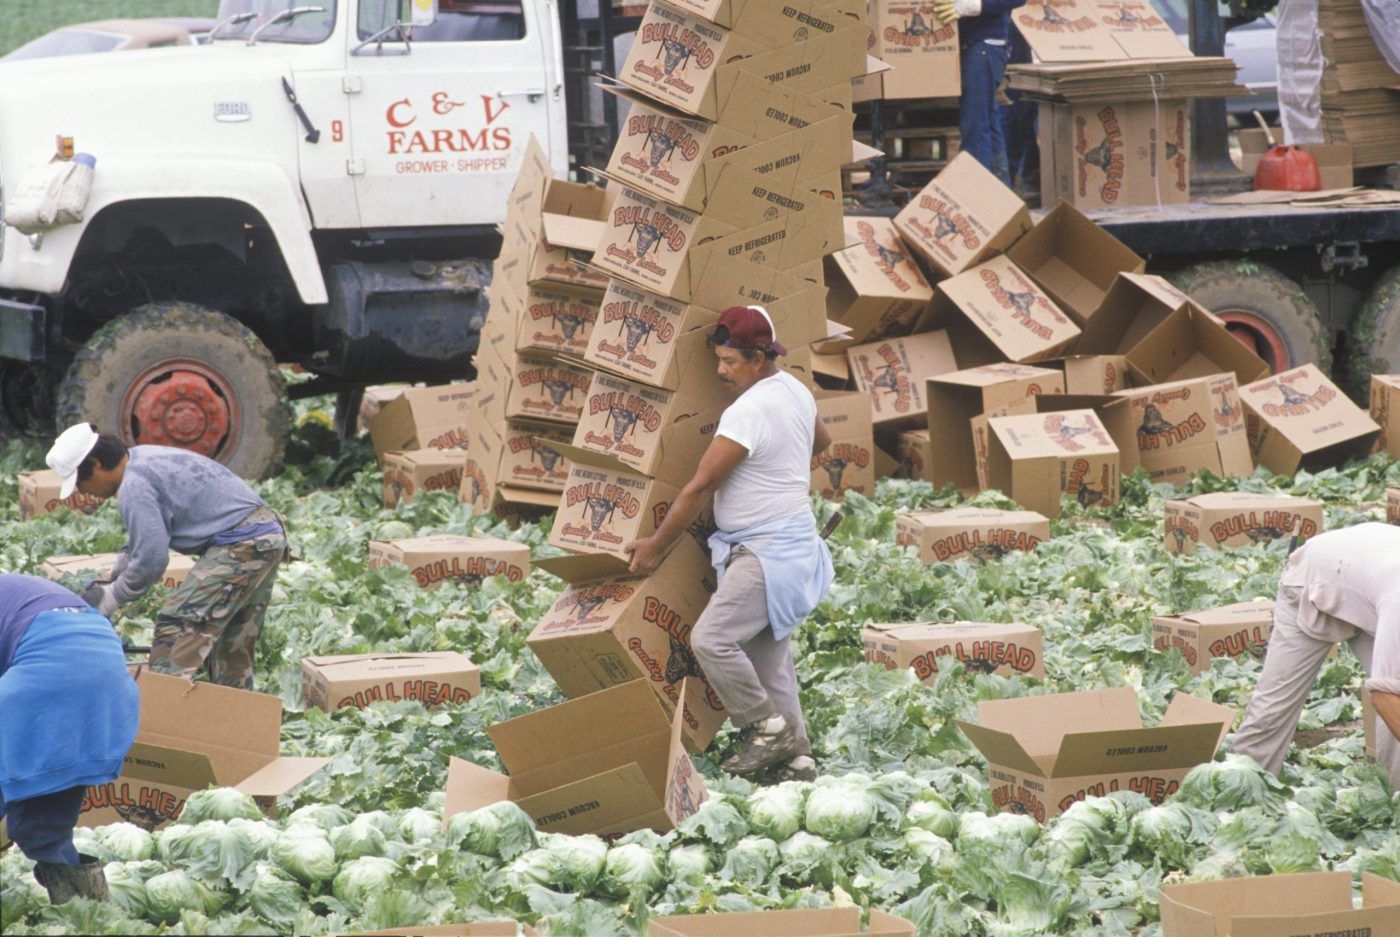 Migrant farm workers harvest and box lettuce in San Joaquin Valley, CA